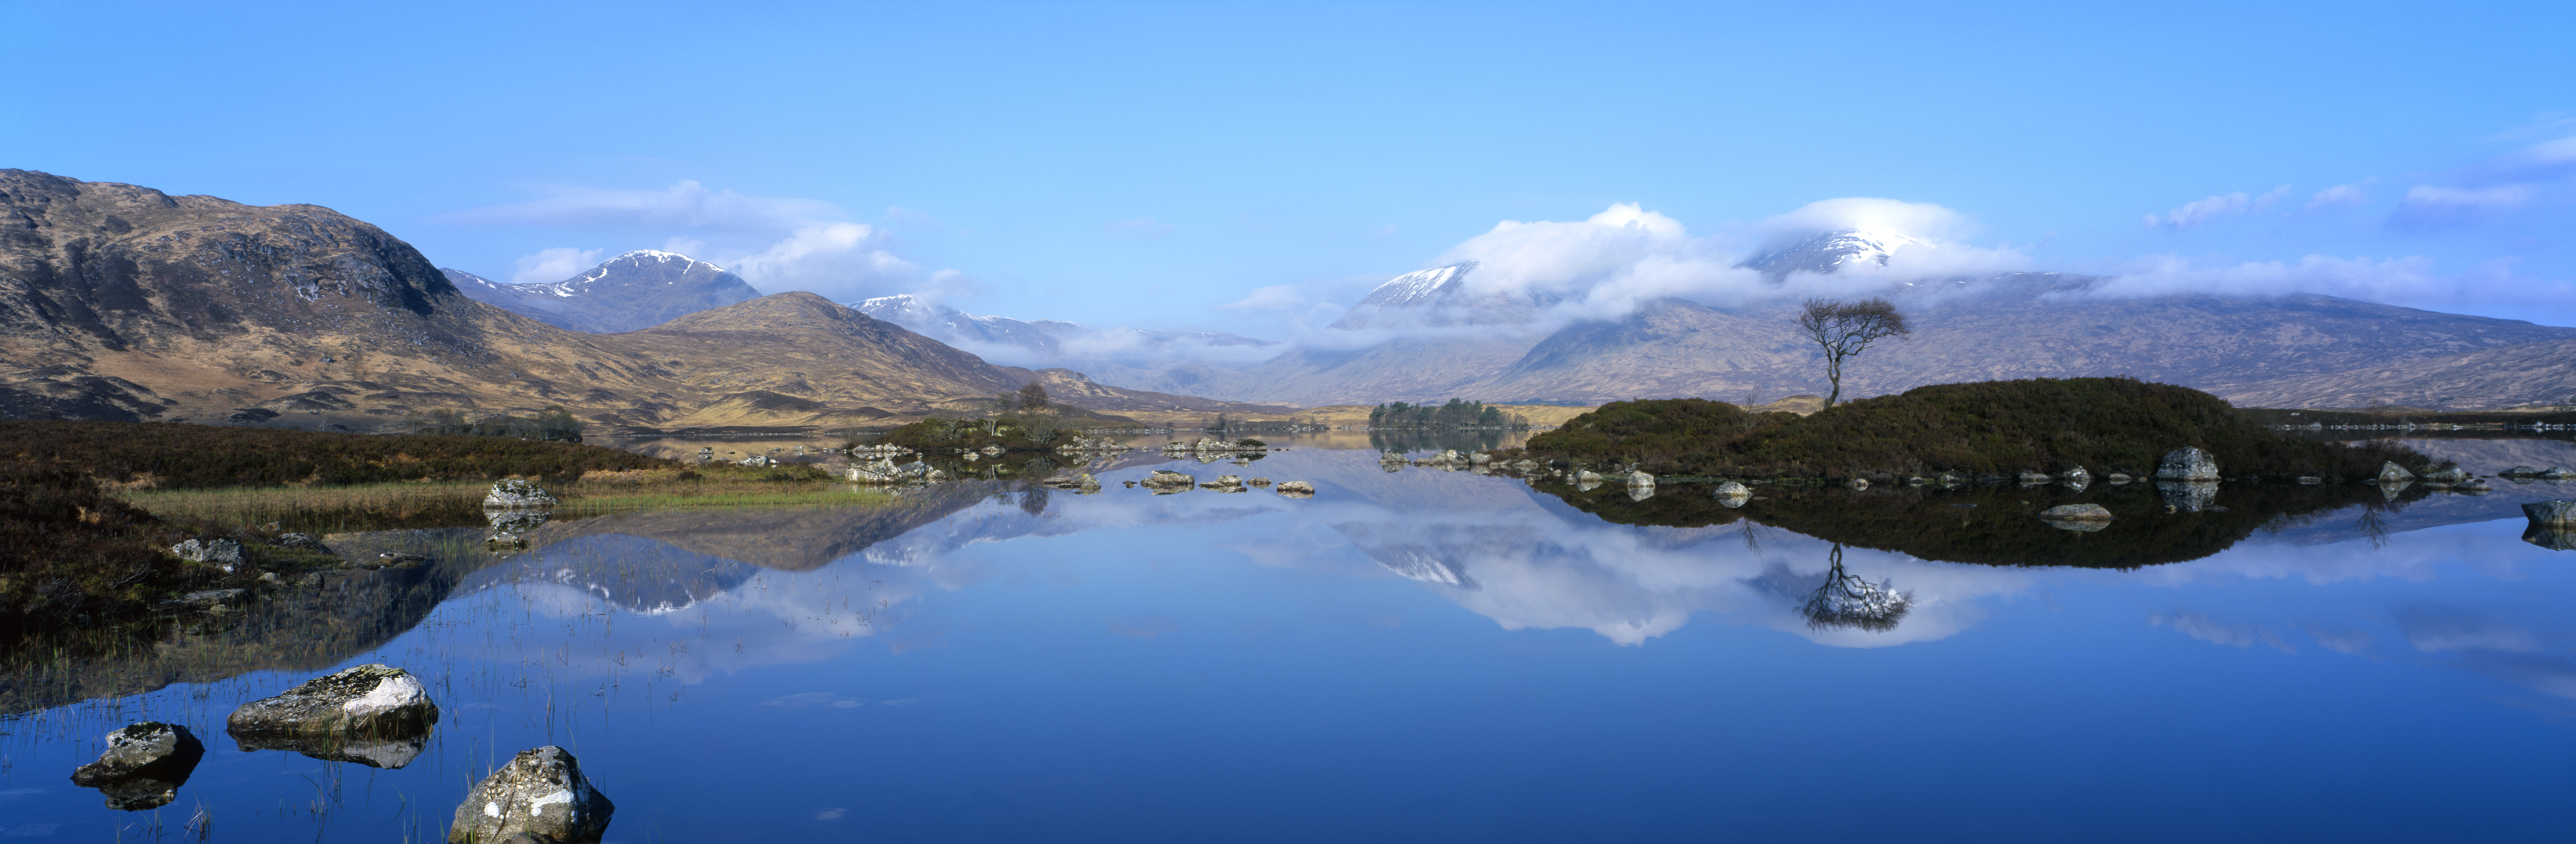 Clouds, mountains, stones and trees mirrored in water. Loch Na-Achlaise, Scotland.